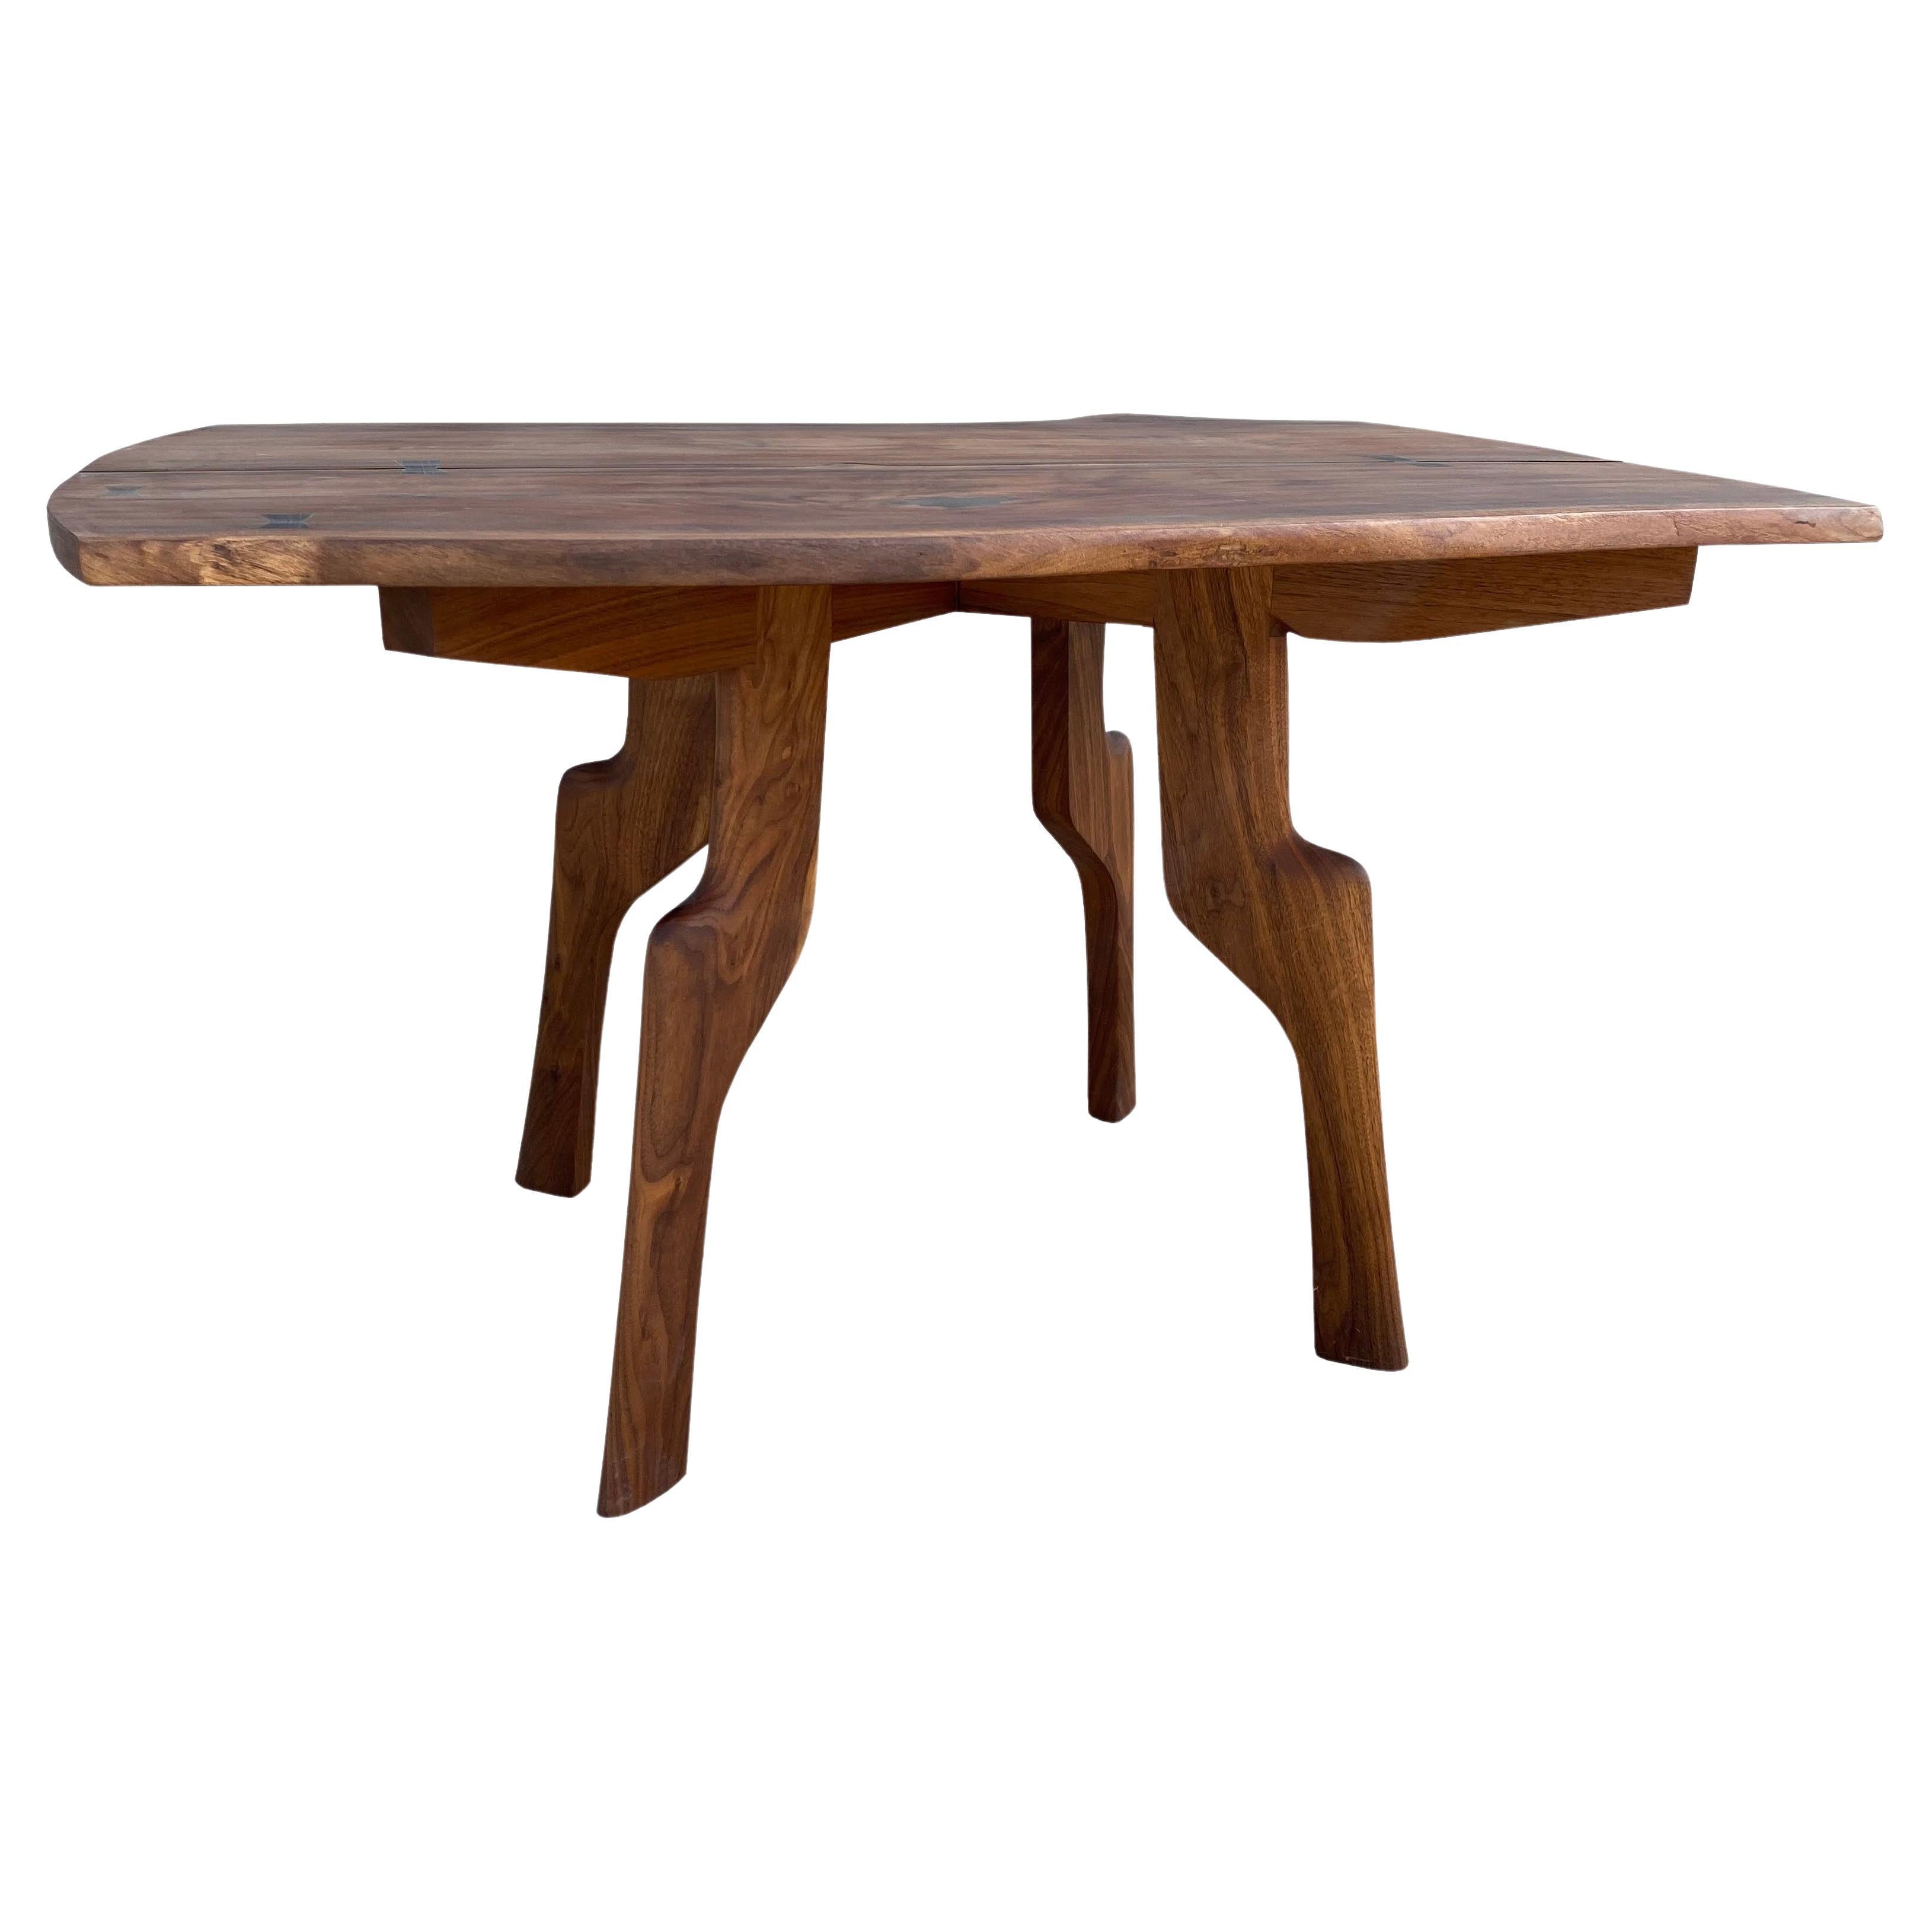 The Fawn Table For Sale